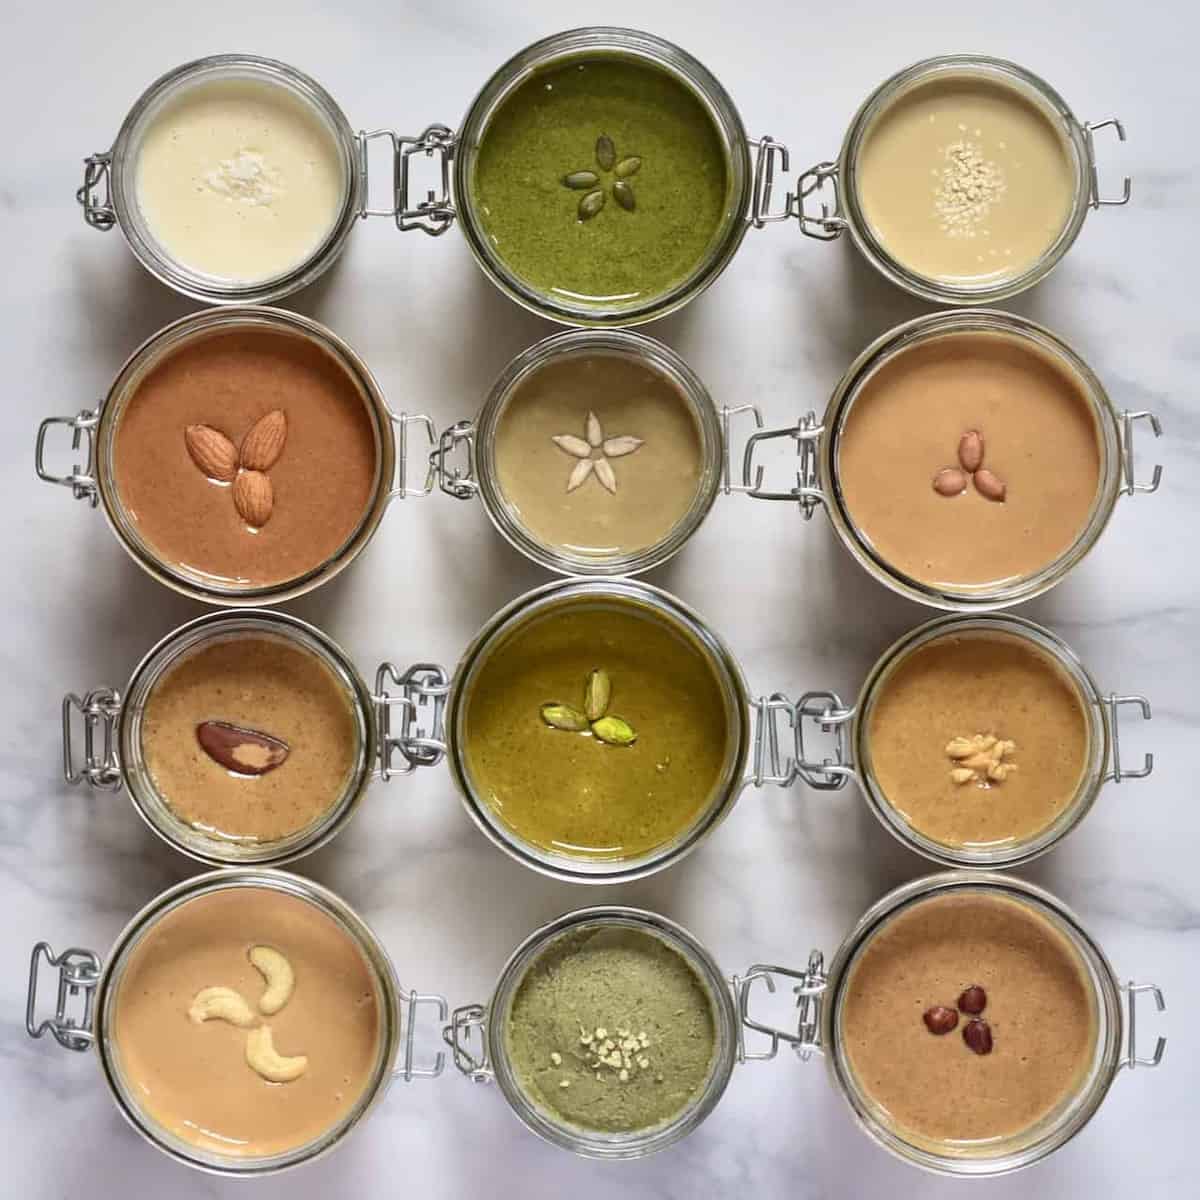 Twelve jars filled with different types of seed and nut homemade butters